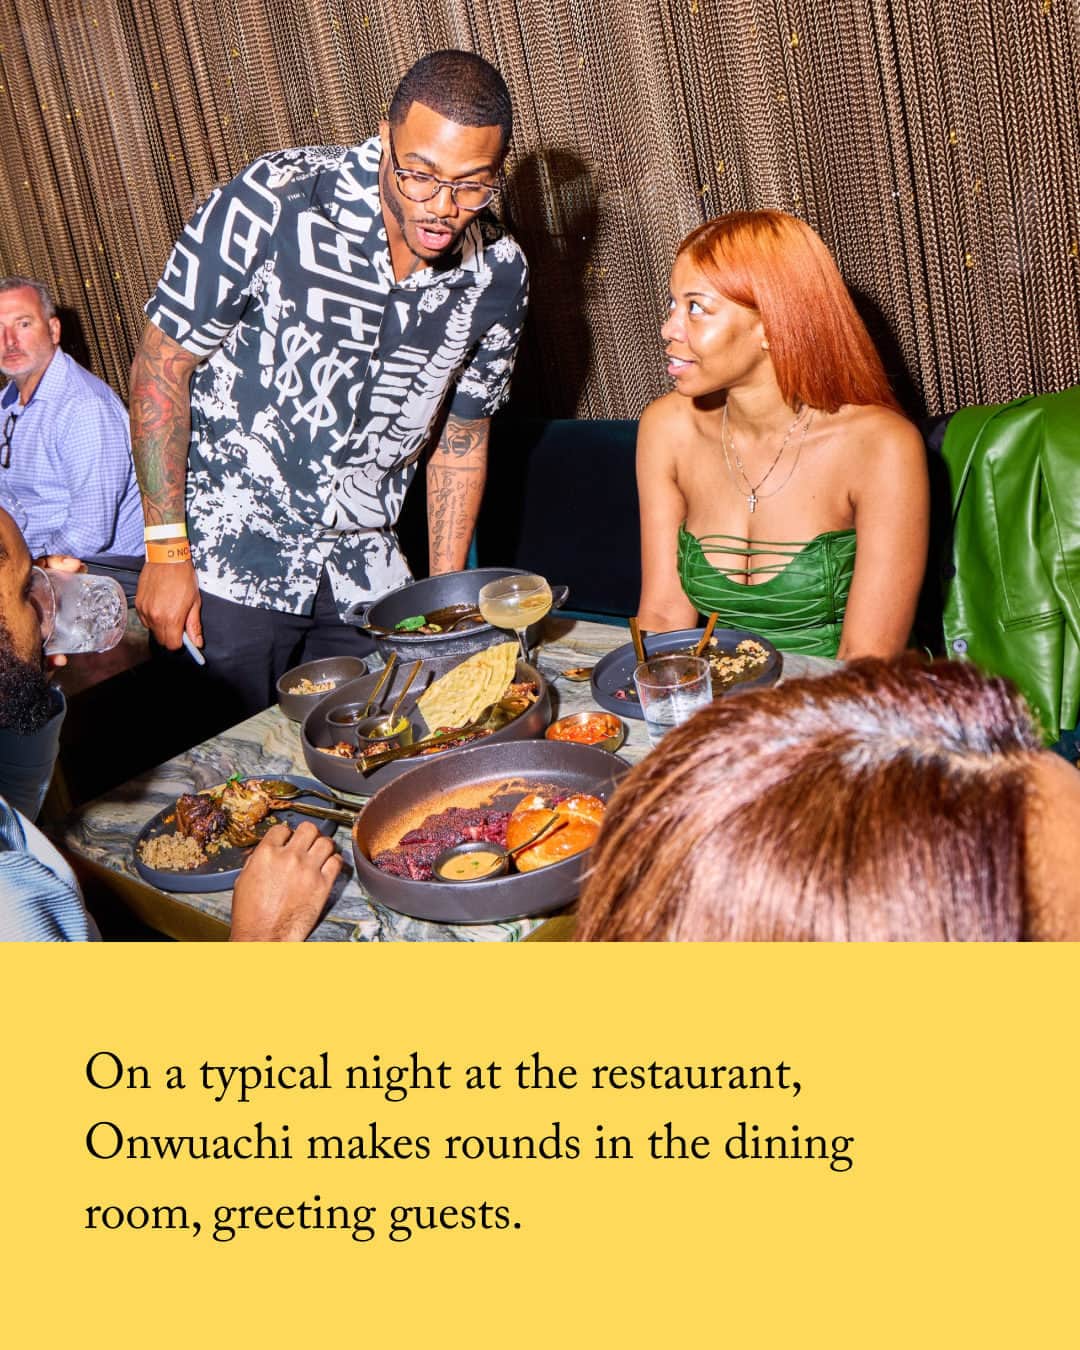 The New Yorkerさんのインスタグラム写真 - (The New YorkerInstagram)「It’s been a very good year for Kwame Onwuachi, Hannah Goldfield writes. Last November, Onwuachi opened his first restaurant in New York City, where he was born and raised. Tatiana, which is located in Lincoln Center, has been visited by guests like Jay-Z and Beyoncé and was awarded three stars by a Times restaurant critic—an extraordinary achievement for a rookie restaurant.  Onwuachi comes from a collage of cuisines; he was formally trained at the Culinary Institute of America, where he learned classical French cooking. During that time, he was also making burritos at a local Mexican restaurant and selling ramen behind the student rec center. Tatiana’s menu reflects his personal history, combining the cuisines of his elders, who come from Creole Louisiana, Trinidad and Tobago, and Nigeria, with the cuisines of the city’s corner stores and street carts. “His formal training inspired him not simply to plug Afro-Caribbean flavors into European formulae, but to exalt Afro-Caribbean ingredients and techniques,” Goldfield writes.  At Tatiana, which feels more like a nightclub than a stuffy house of fine dining, Onwuachi seems to revel in the contradictions of challenging the system from the inside, Goldfield writes: “that he feeds some of New York’s wealthiest diners while wearing a do-rag; that at the home of the New York Symphony Orchestra, he’s blaring ‘music with the curse words.’ ” “I’m playing my fucking music that I wanna play, we’re putting oxtails on the menu; I’m putting a Black woman’s name on the side of Lincoln Center. I feel like I’m being as radical as I want to be,” Onwuachi said. Read more at the link in our bio. Photographs by @evan_angelastro for The New Yorker.」10月3日 22時00分 - newyorkermag